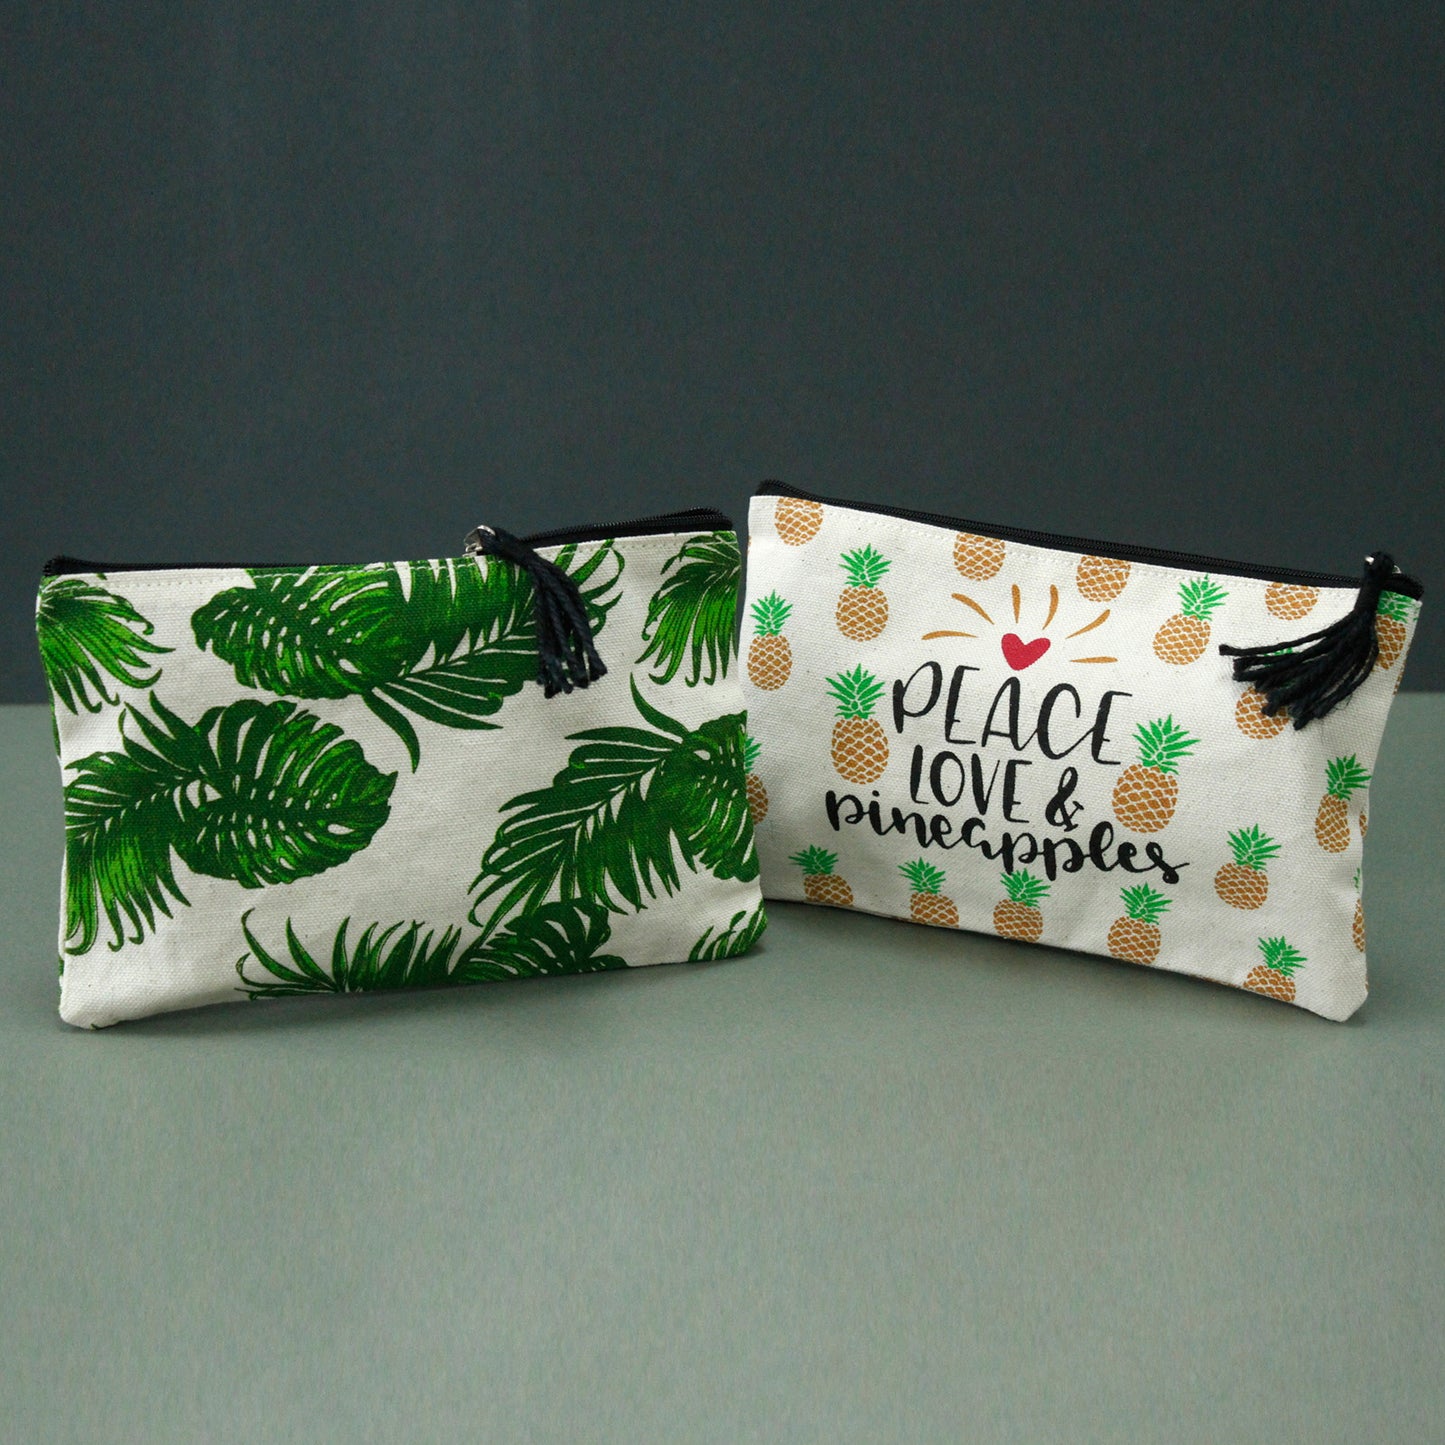 Classic Zip Pouch - My Med